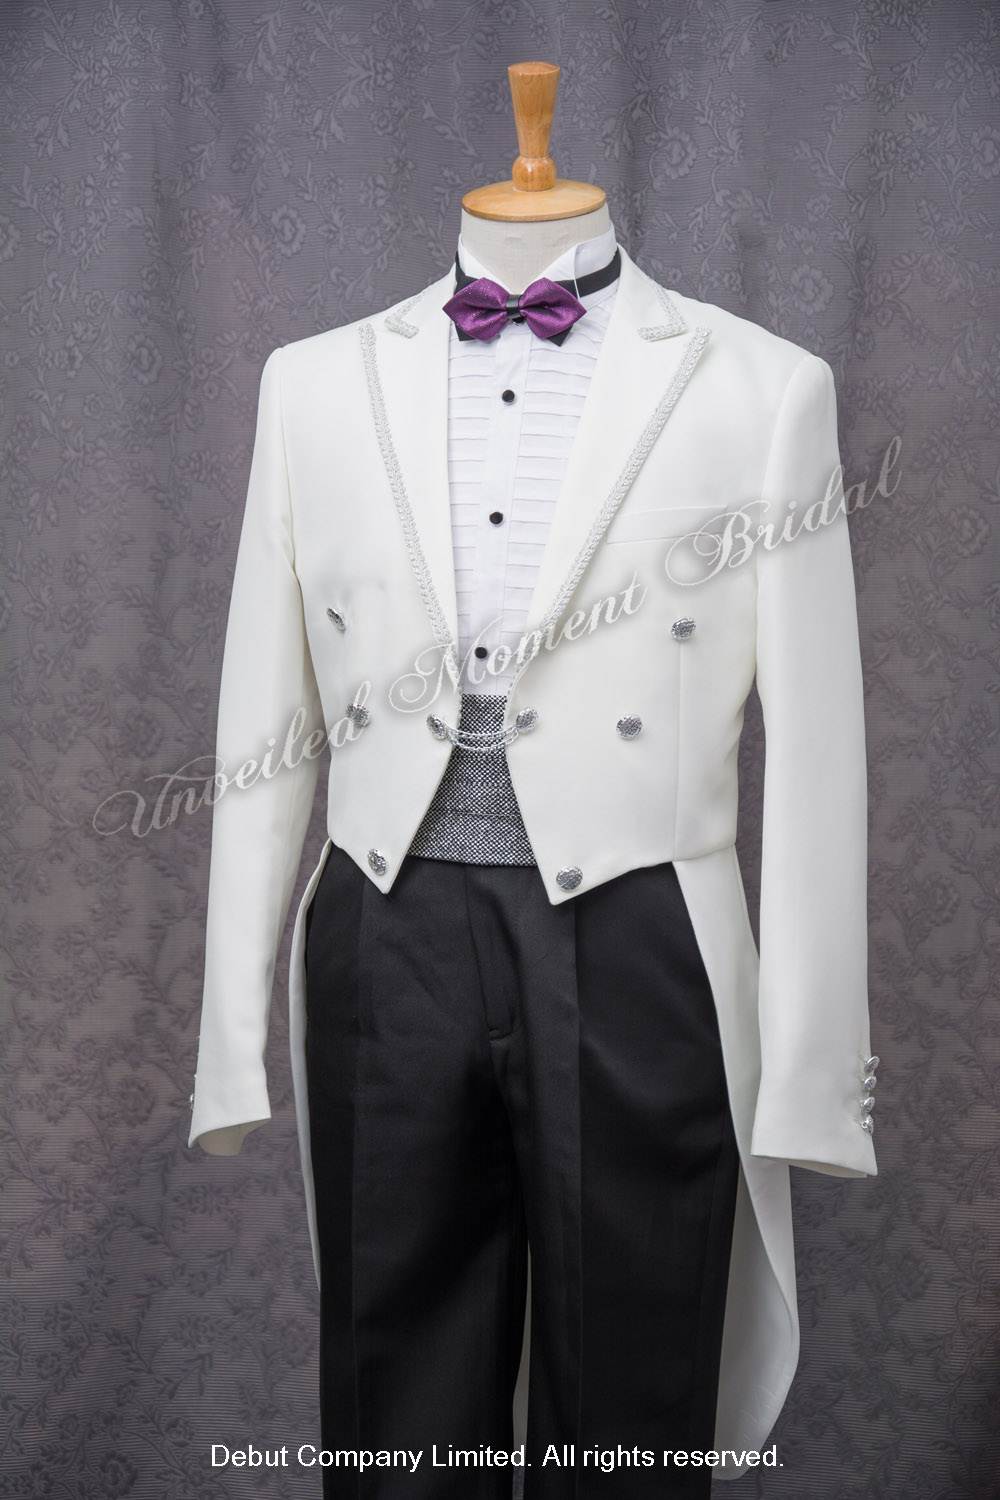 Peak-lapel collar white tuxedo with silver trim and buttons, matched with silver cummerband and purple bow tie 紫色領結, 銀色腰封, 銀邊縫飾, 前短後長燕尾白色新郎禮服